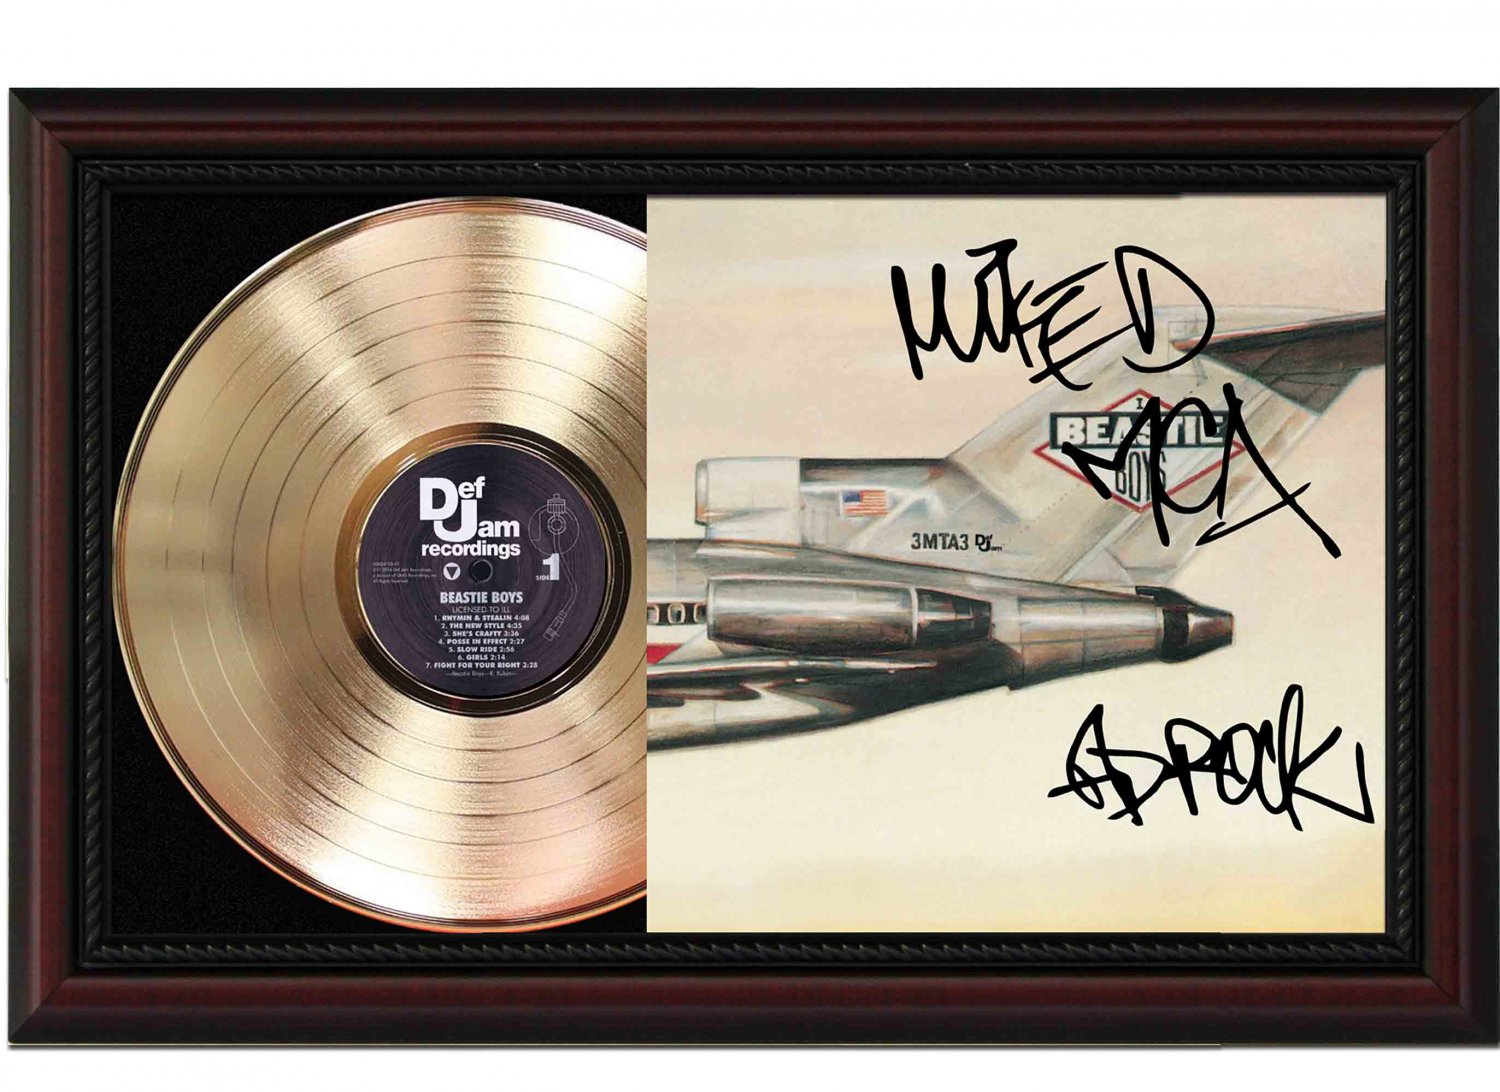 BEASTIE BOYS "Licensed to Ill" Framed Record Display.